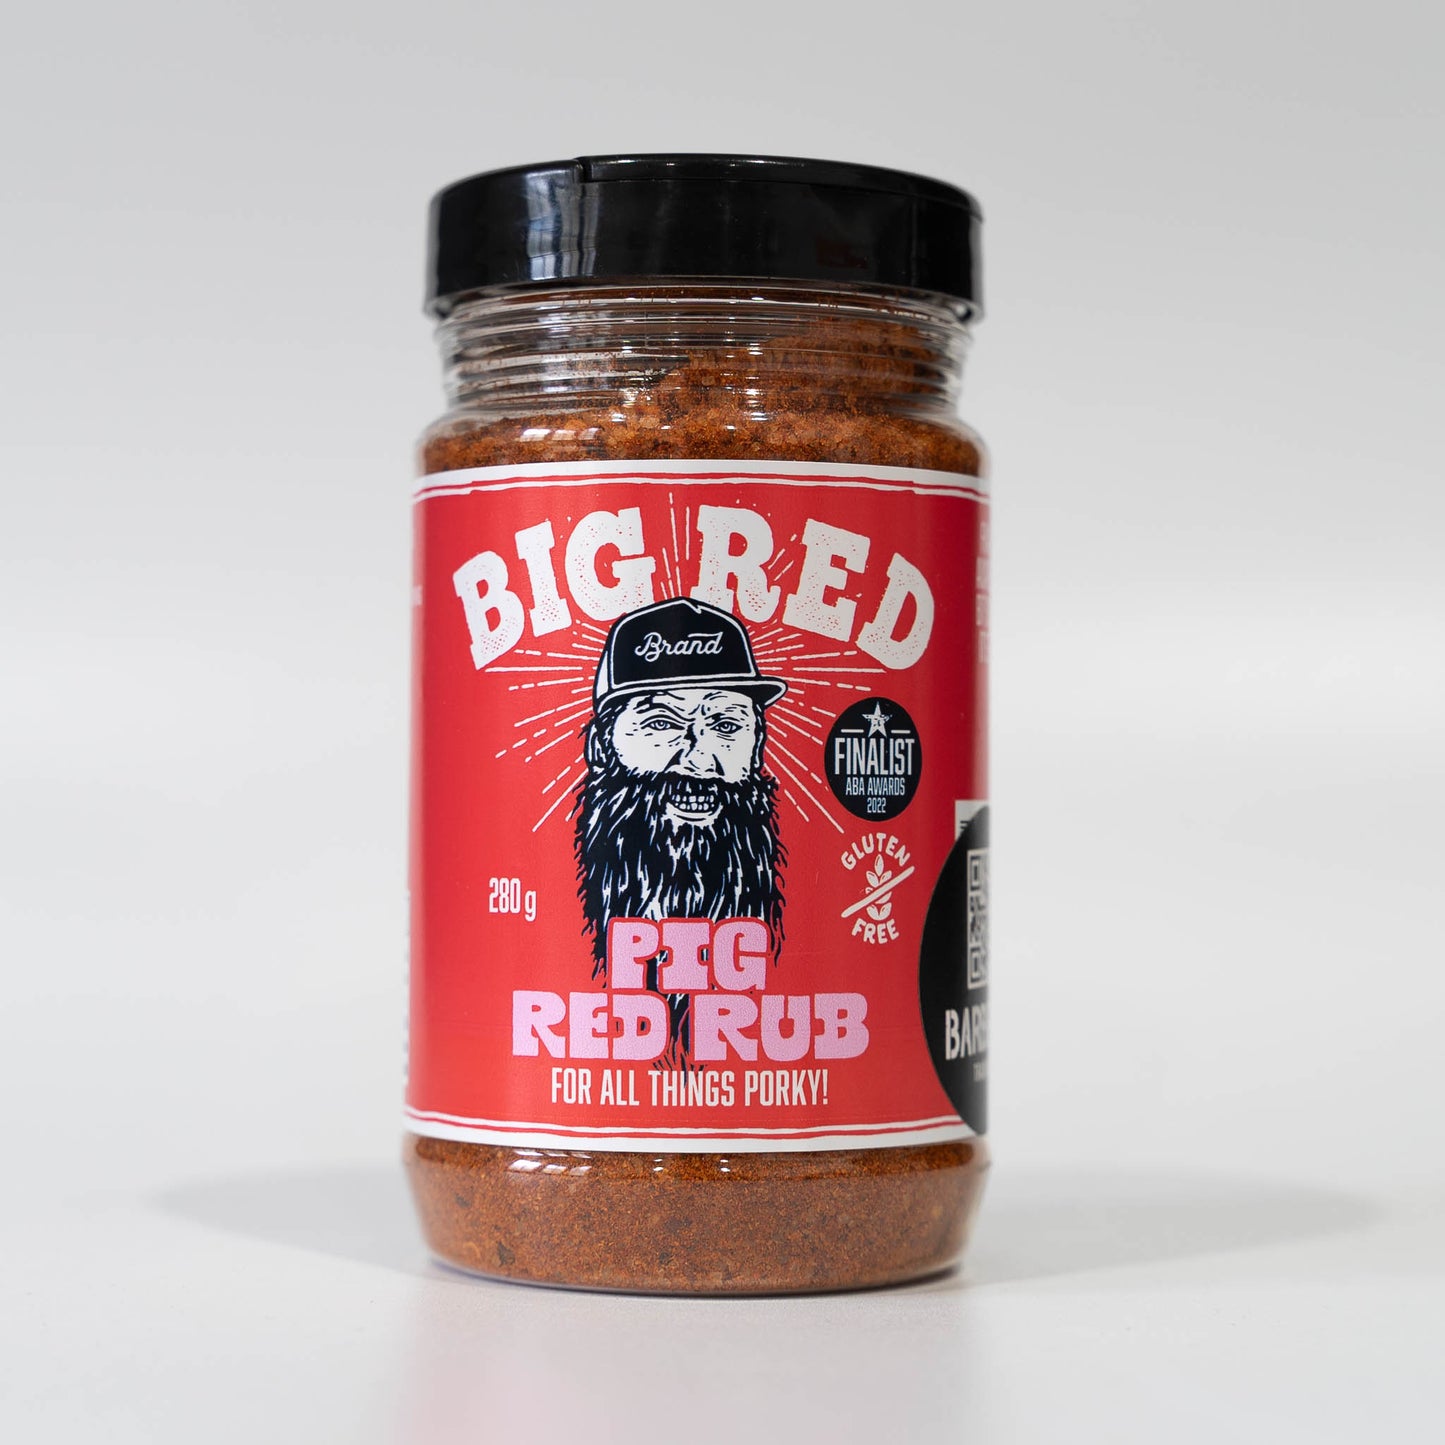 Big Red Brand Beef Chicken and Pork Rubs 3-Pack